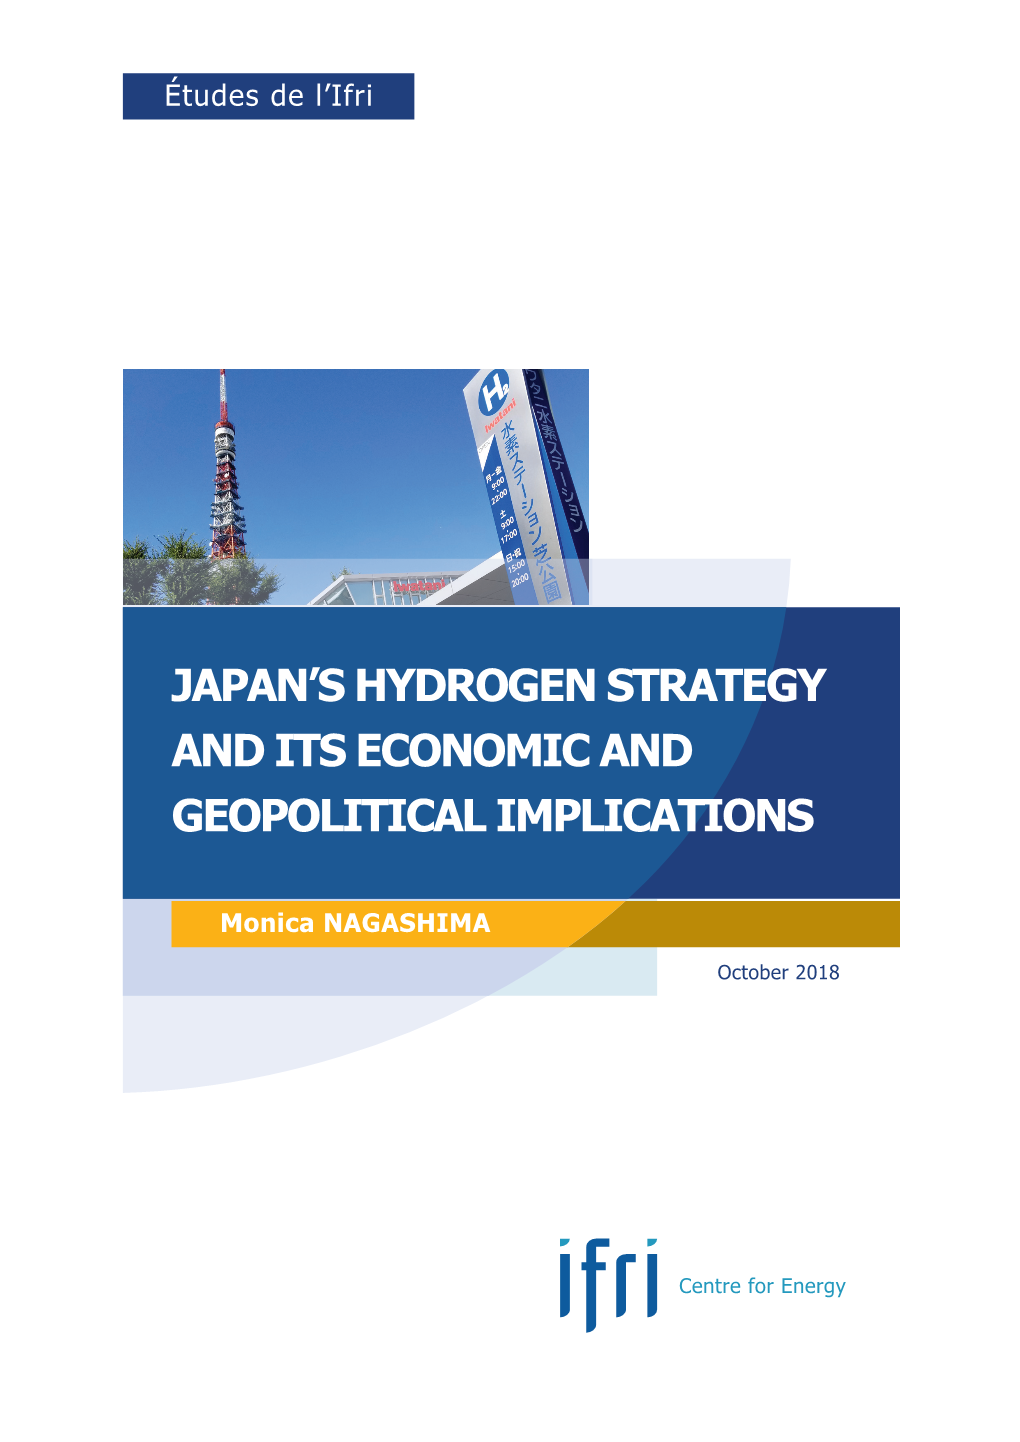 Japan's Hydrogen Strategy and Its Economic and Geopolitical